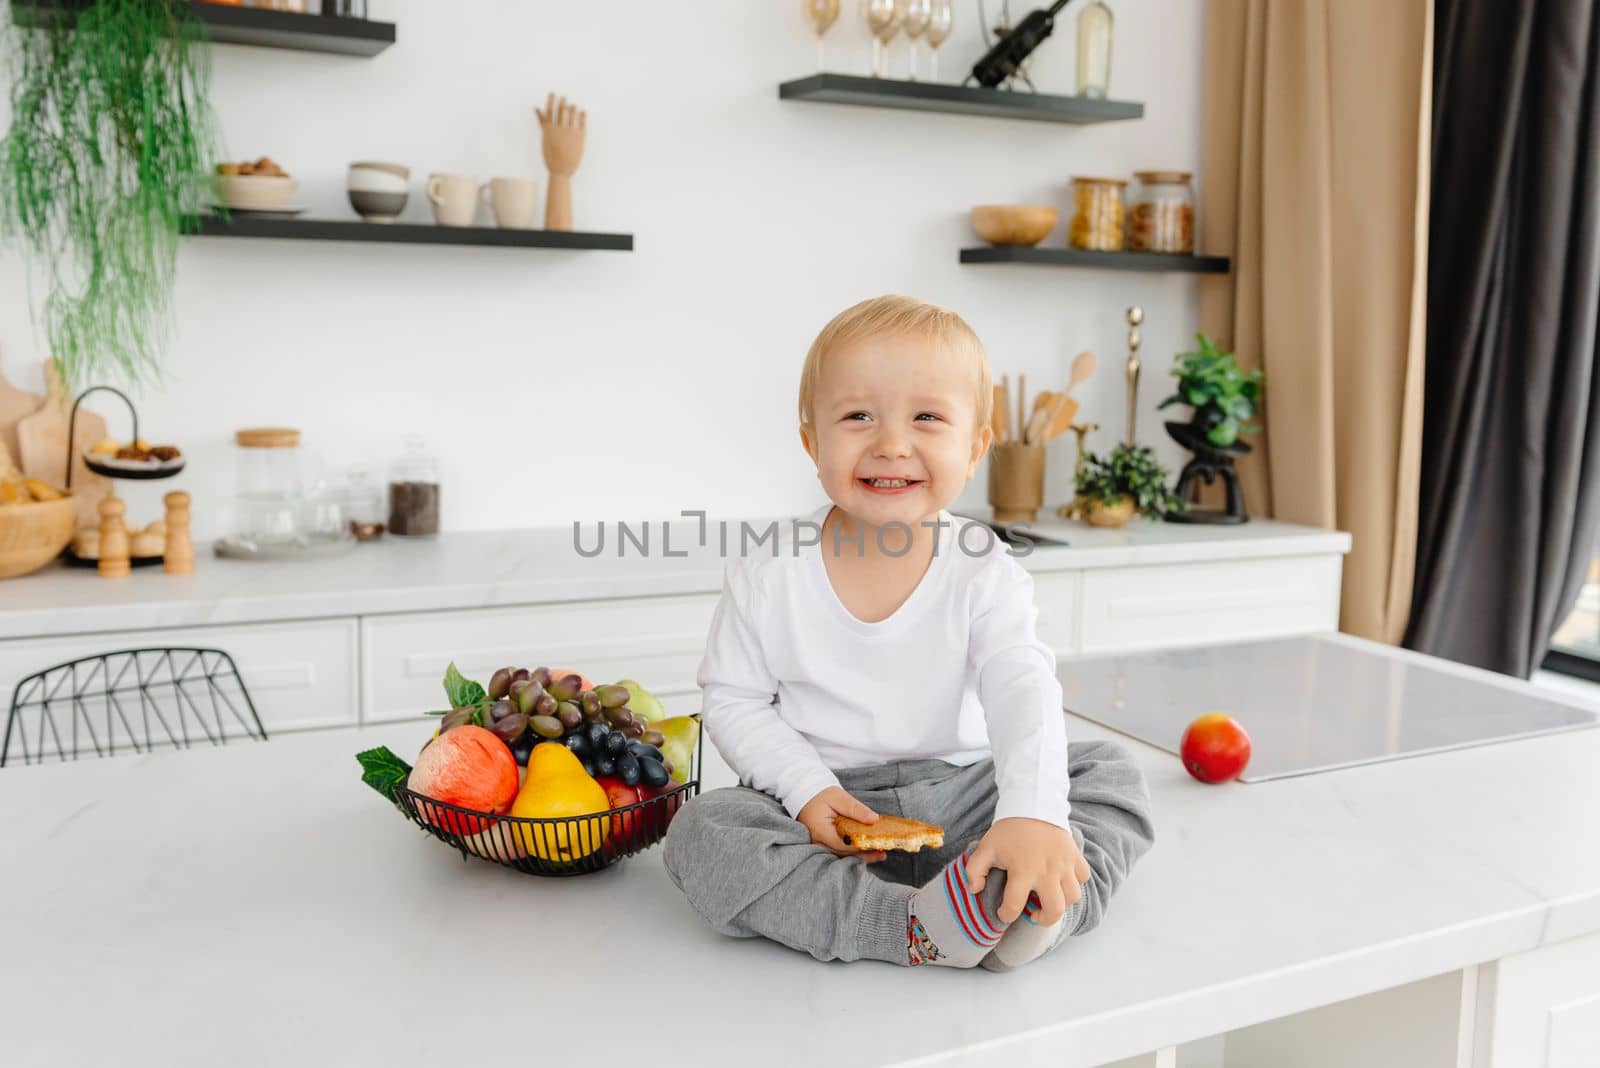 A happy child sitting in the kitchen smiling next to fruits and vegetables by gulyaevstudio